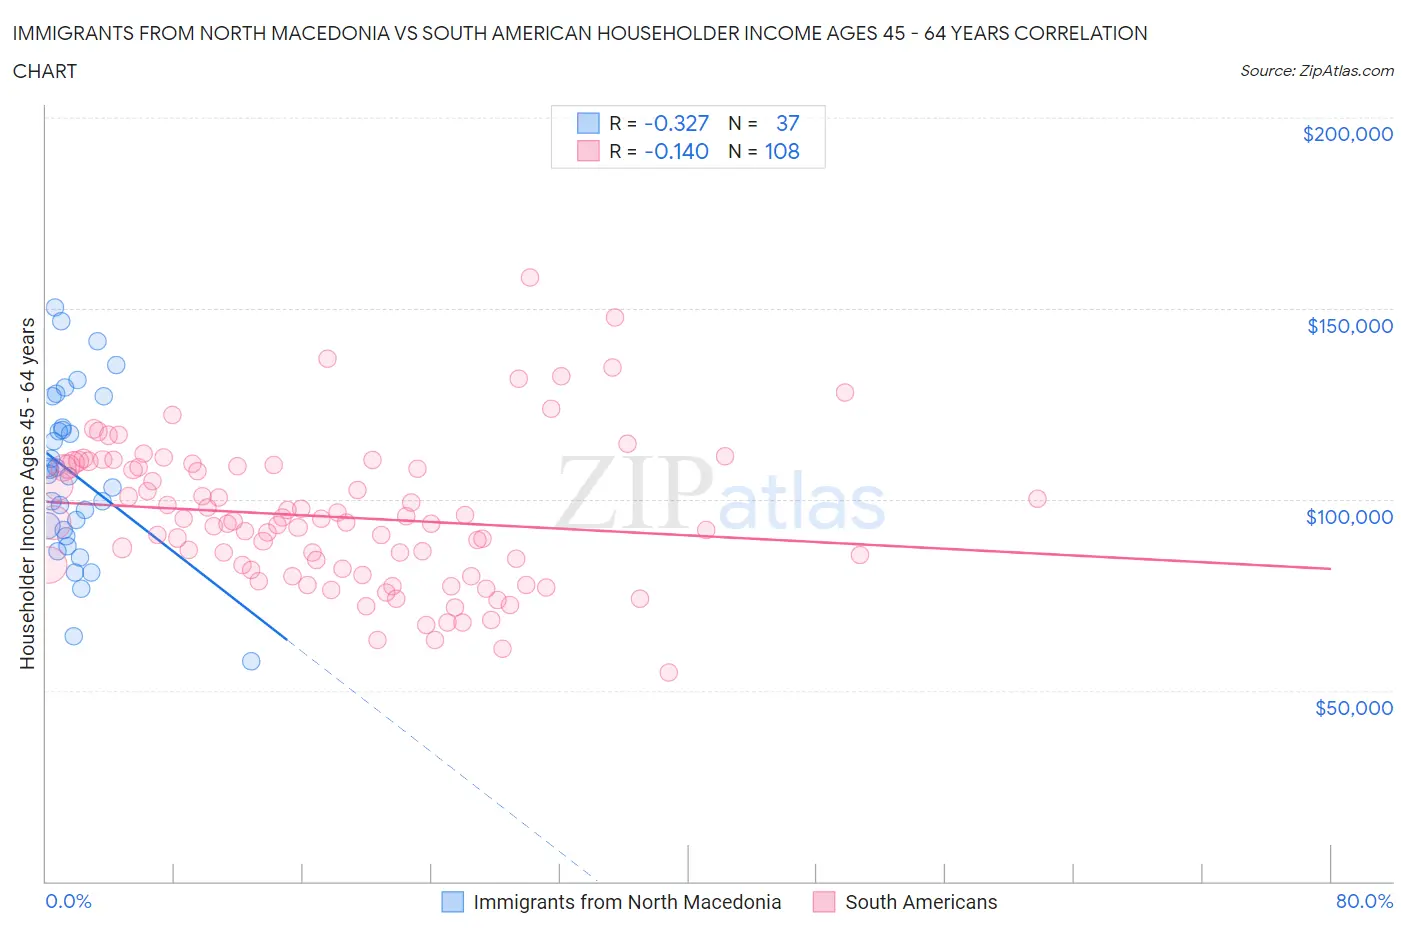 Immigrants from North Macedonia vs South American Householder Income Ages 45 - 64 years